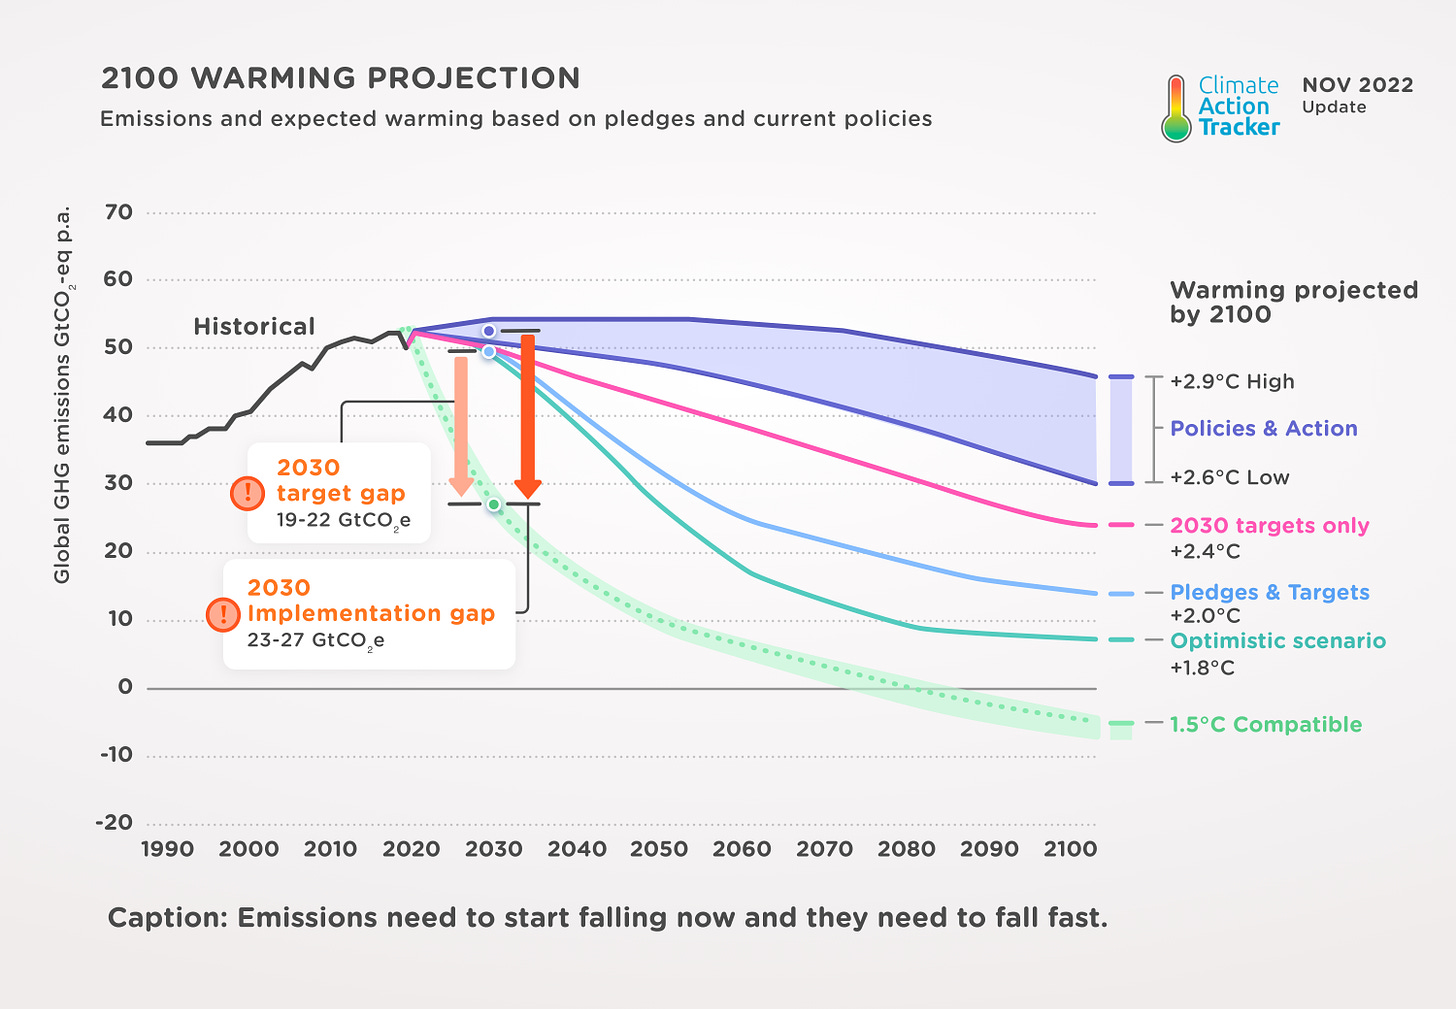 2100 warming projections given different scenarios. The graph shows that there is a significant gap between both implementations and pledges and reductions that are actually needed to achieve "positive" scenarios such as the 1.5 degree target.